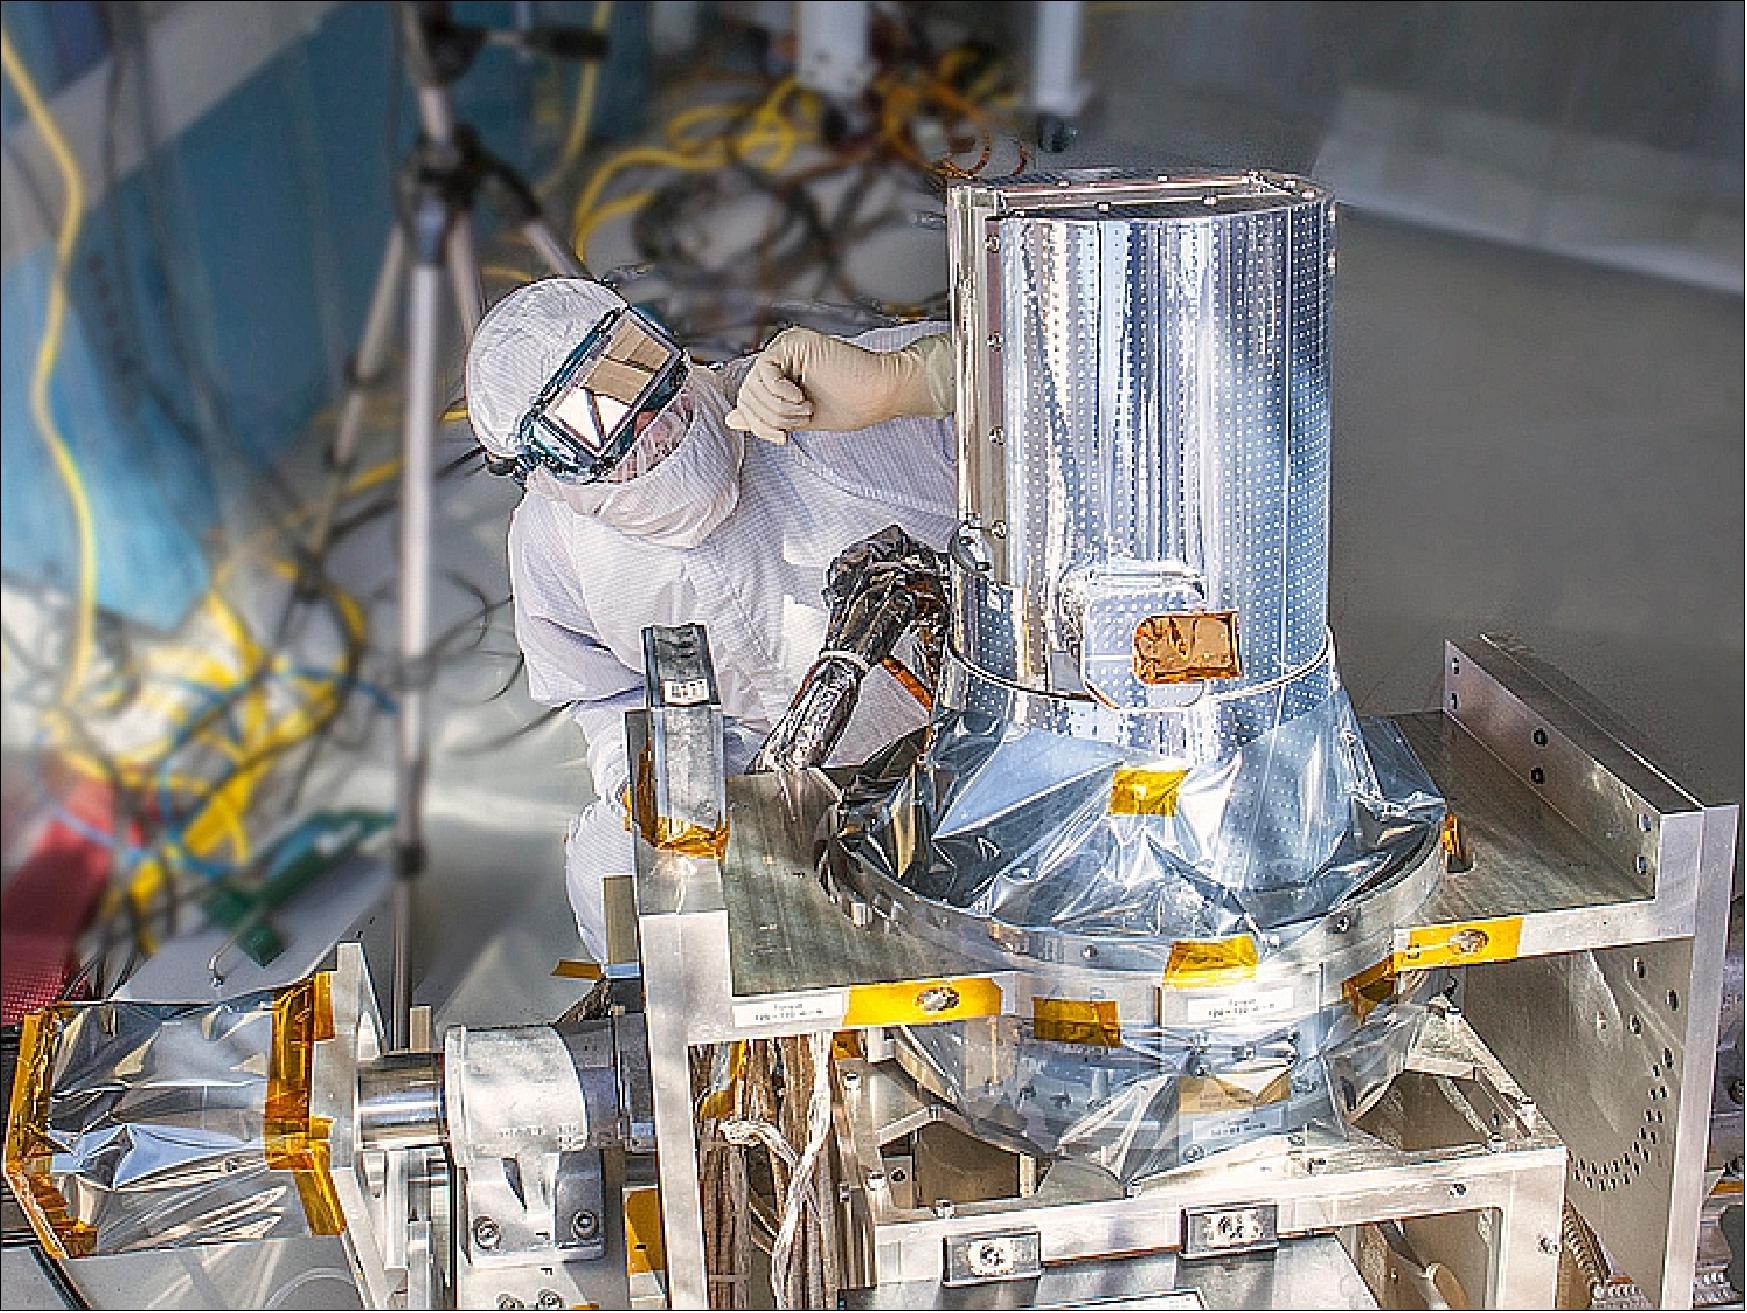 Figure 21: NASA/LaRC scientists are checking SAGE-III in preparation for its trip to the International Space Station (image credit: NASA/LaRC)